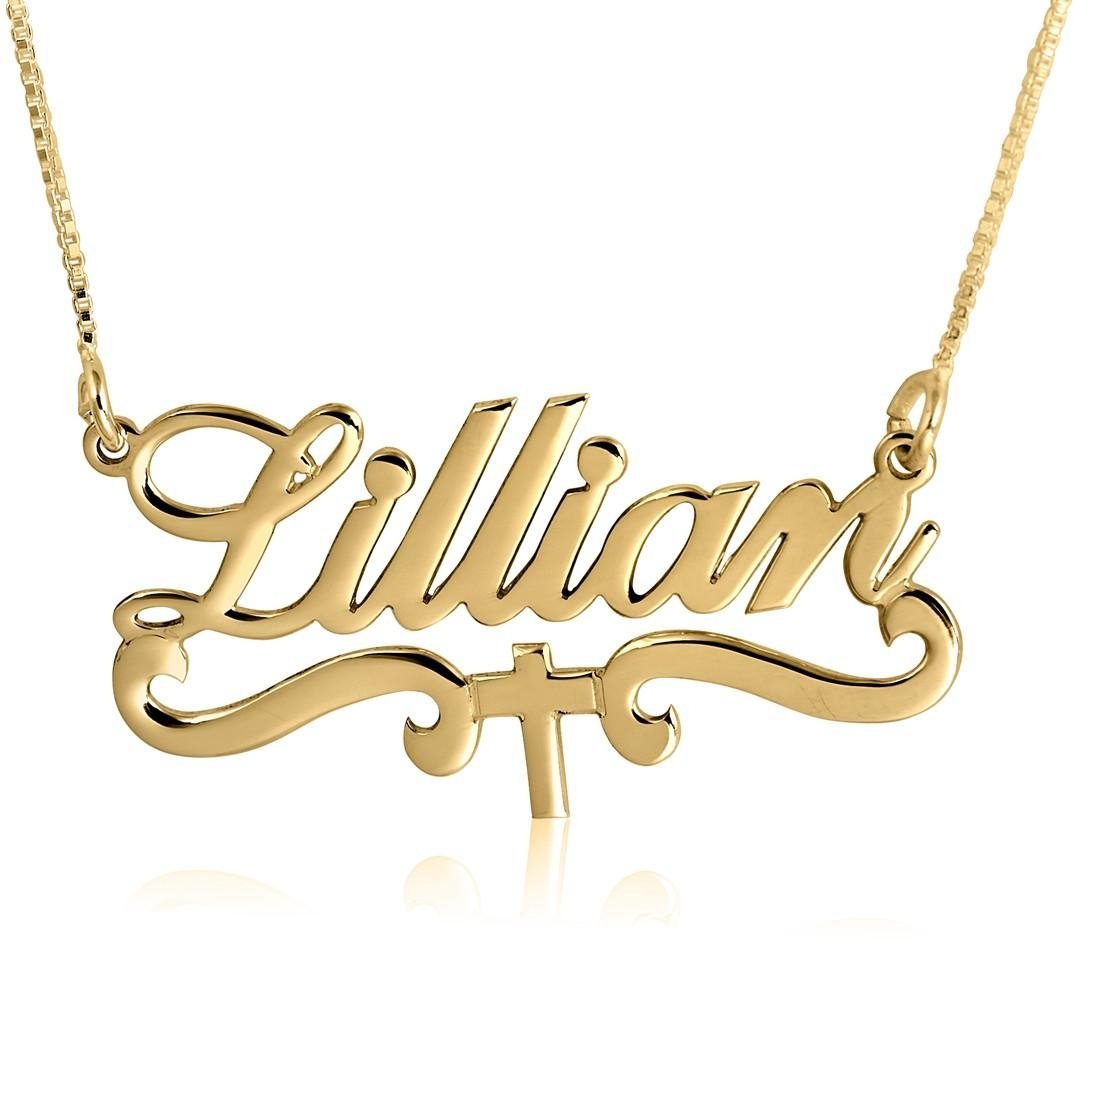 24K Gold Plated Script Name Necklace with Cross and Embellishments - 1